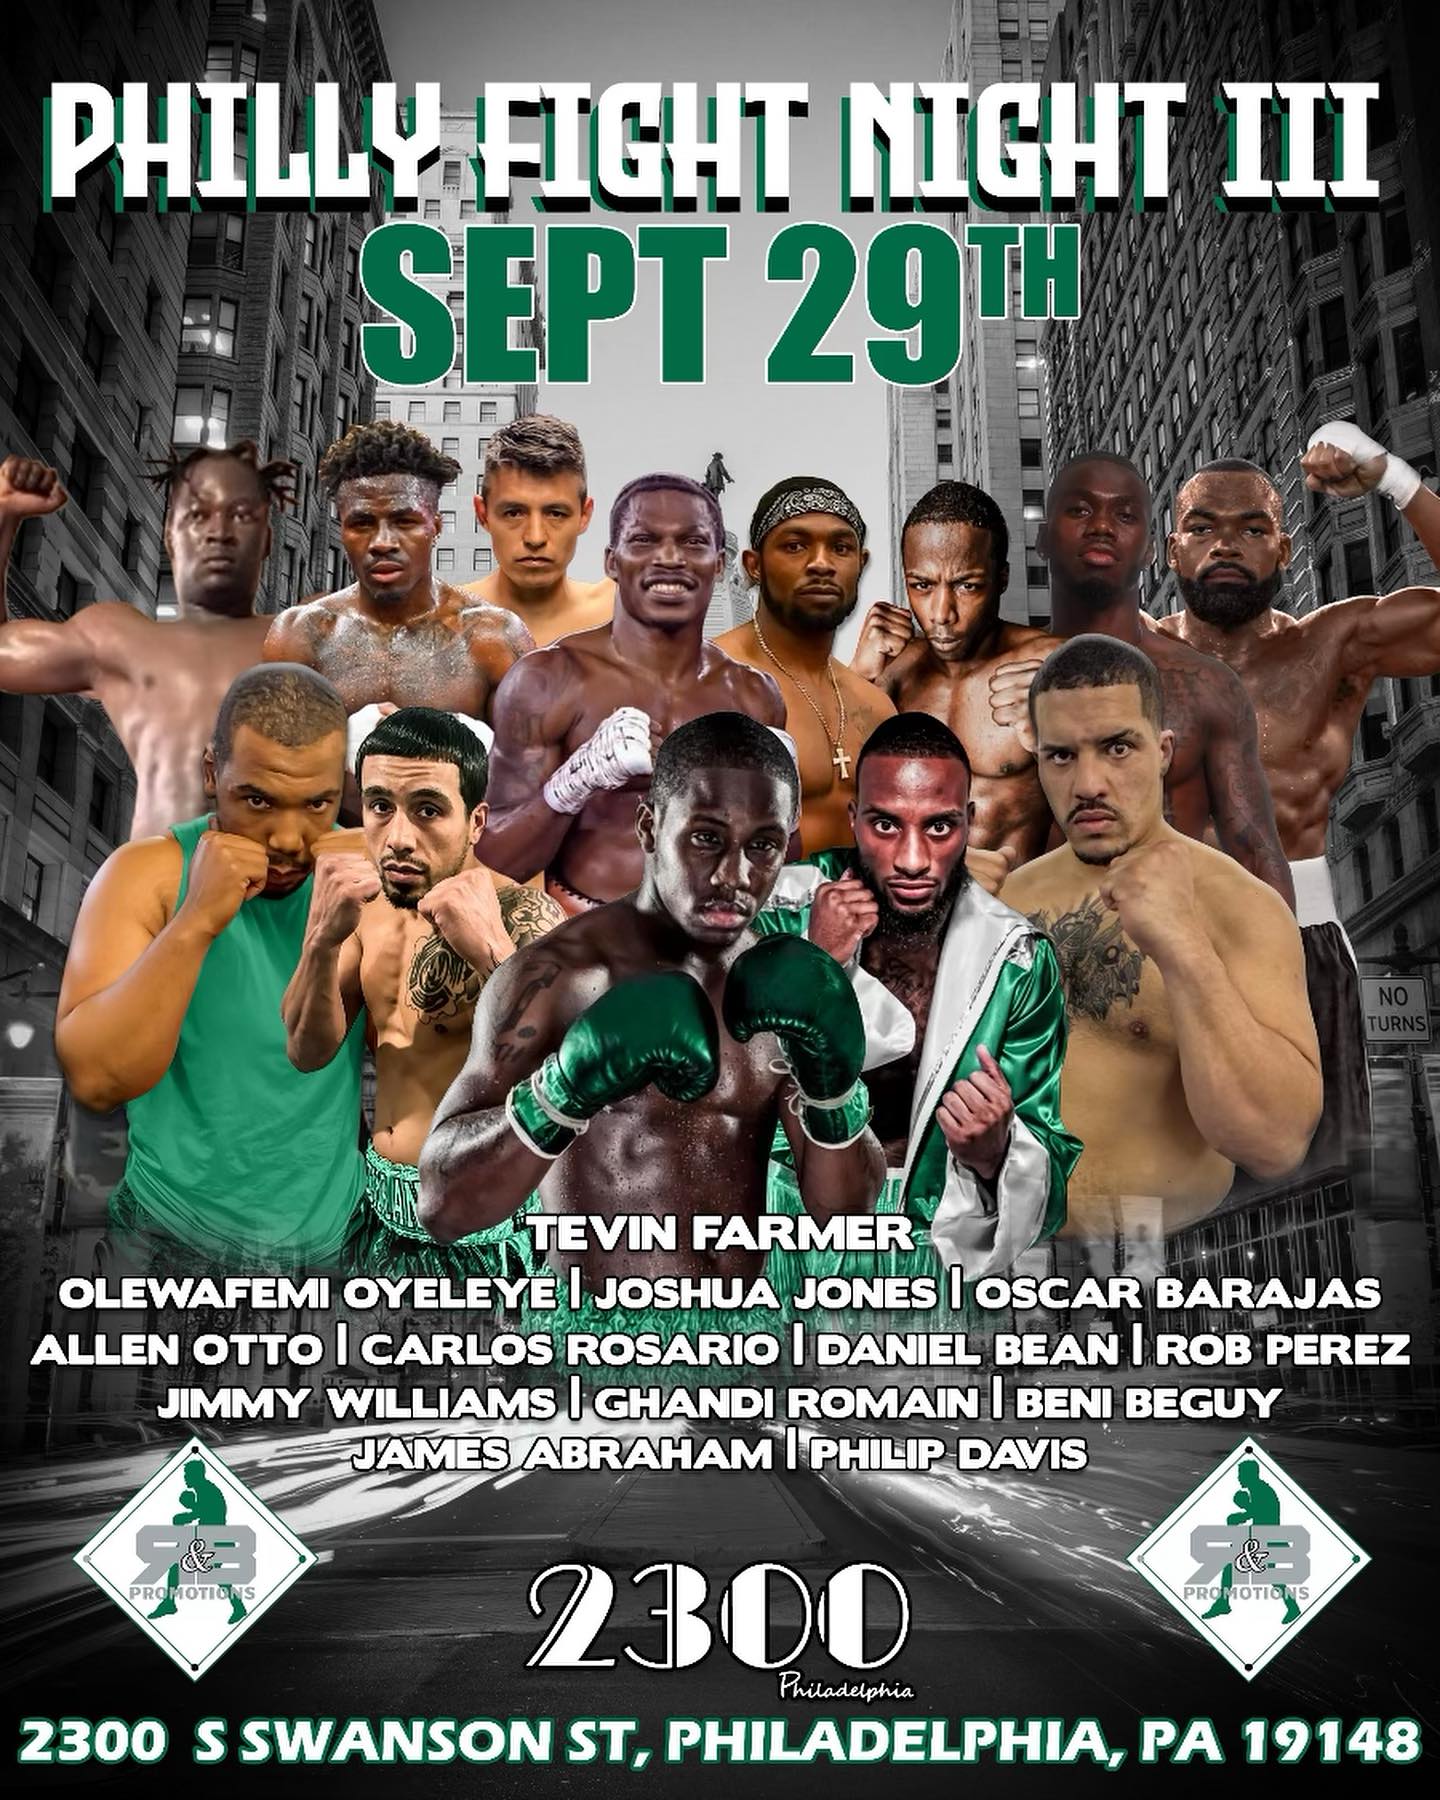 Watch Philly Fight Night 3 on Combat Sports Now